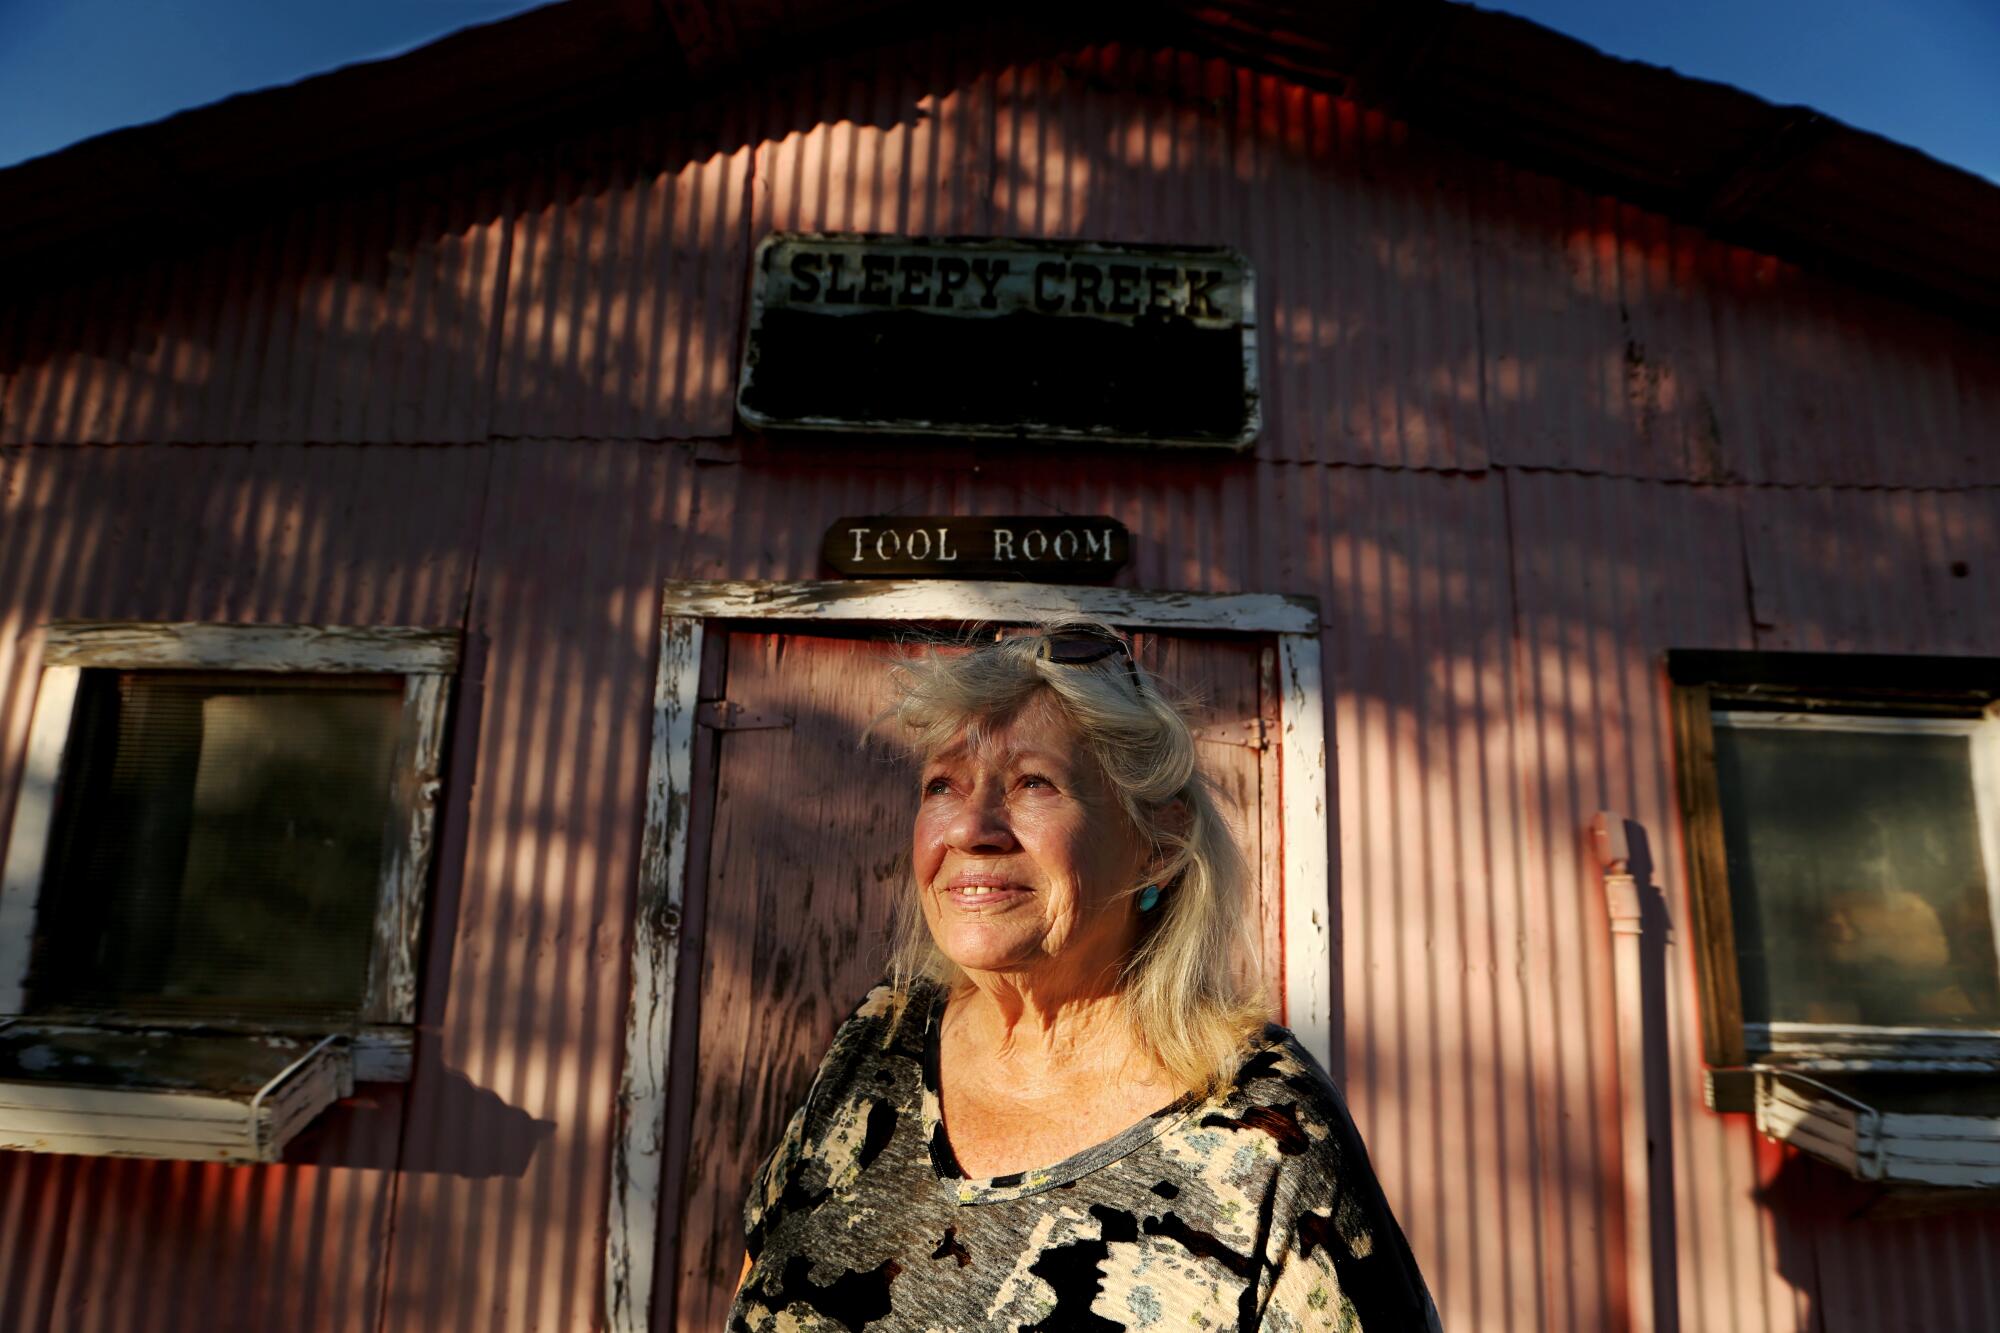 Bonnie Goller is a longtime resident of the Cuyama Valley who is taking part in the community's boycott of carrots.